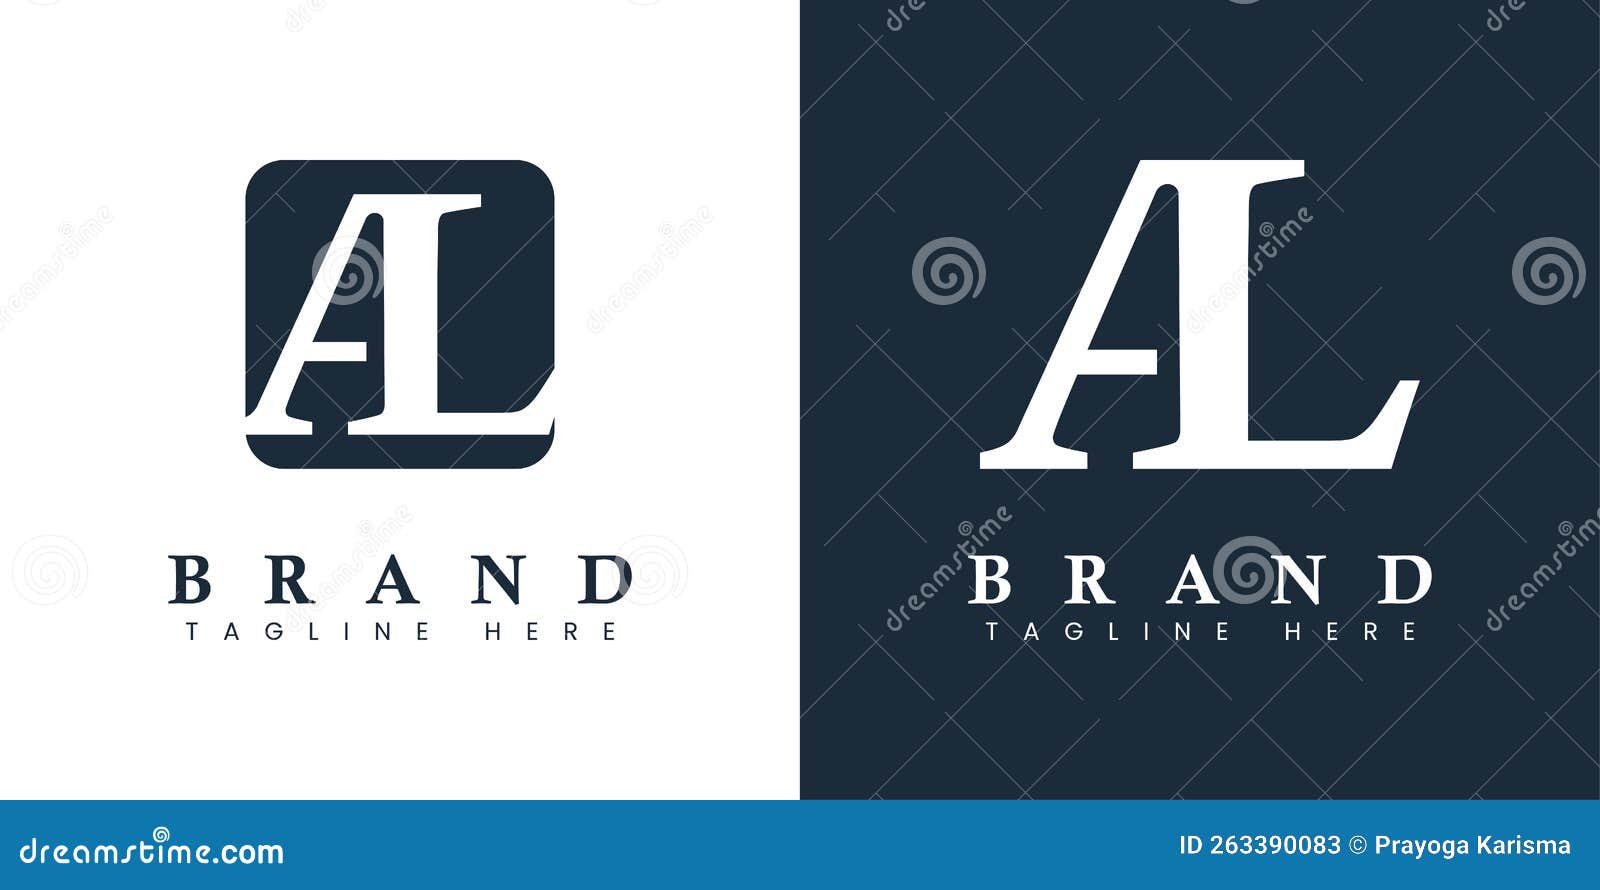 Fashion logos that express your style - 99designs